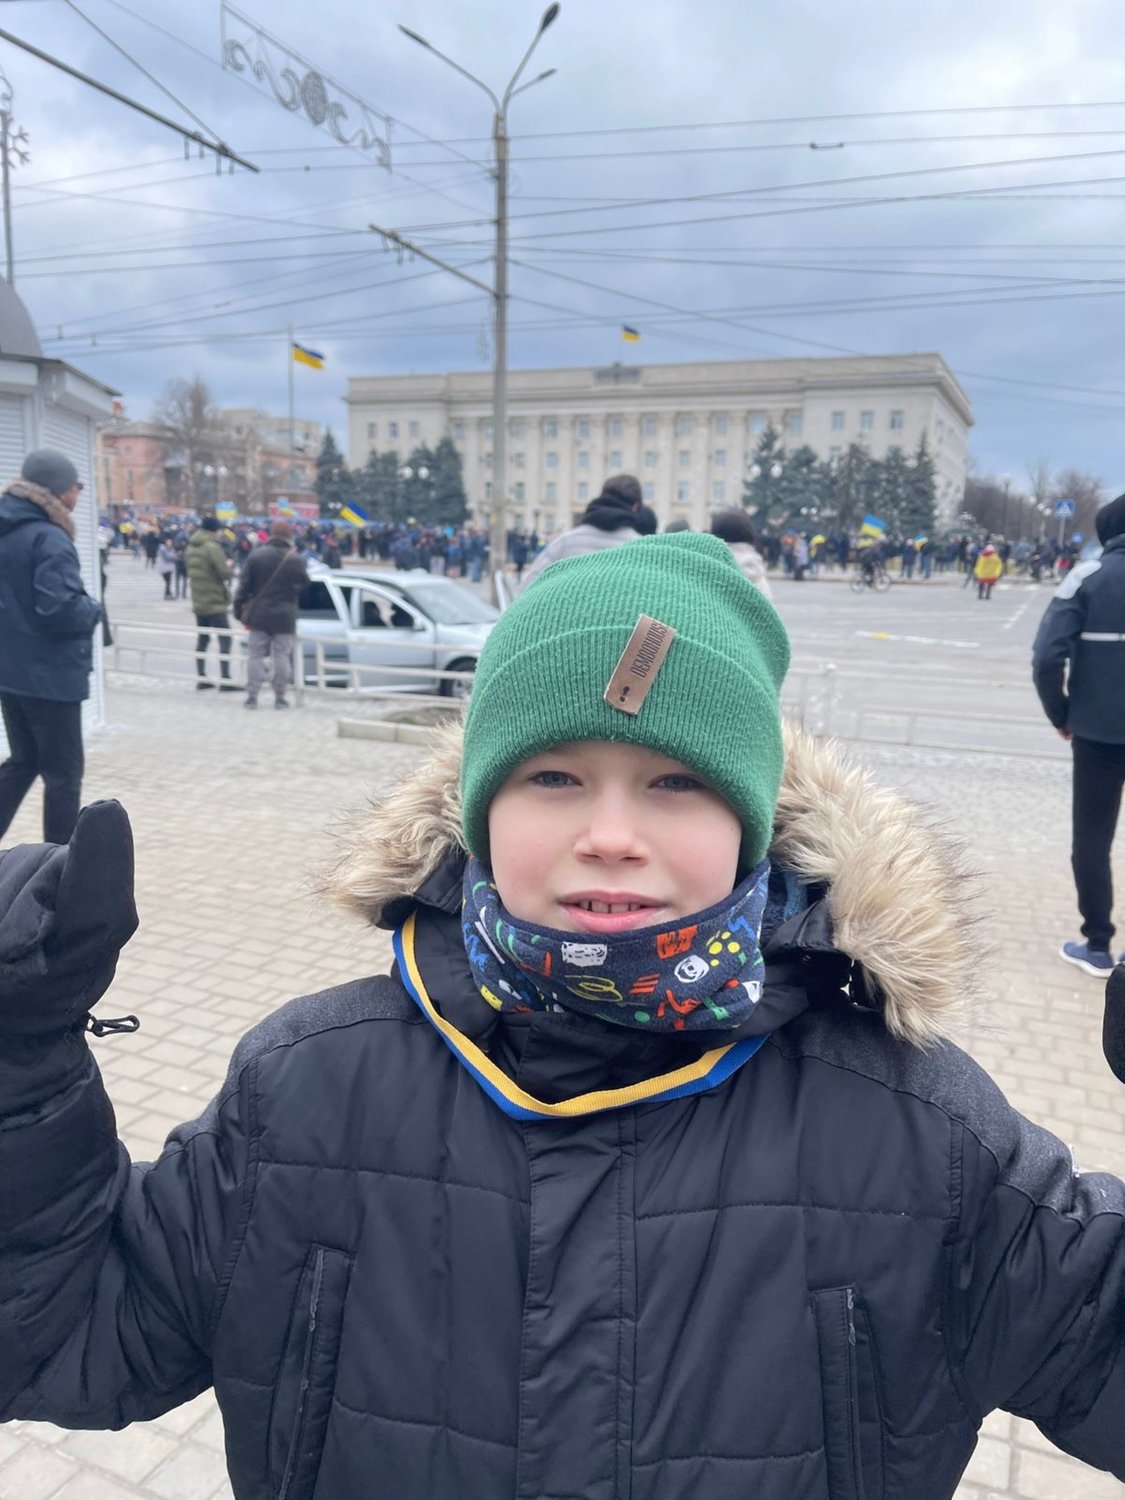 Yegor attended an anti-Russian protest in Kherson before his family fled the city.